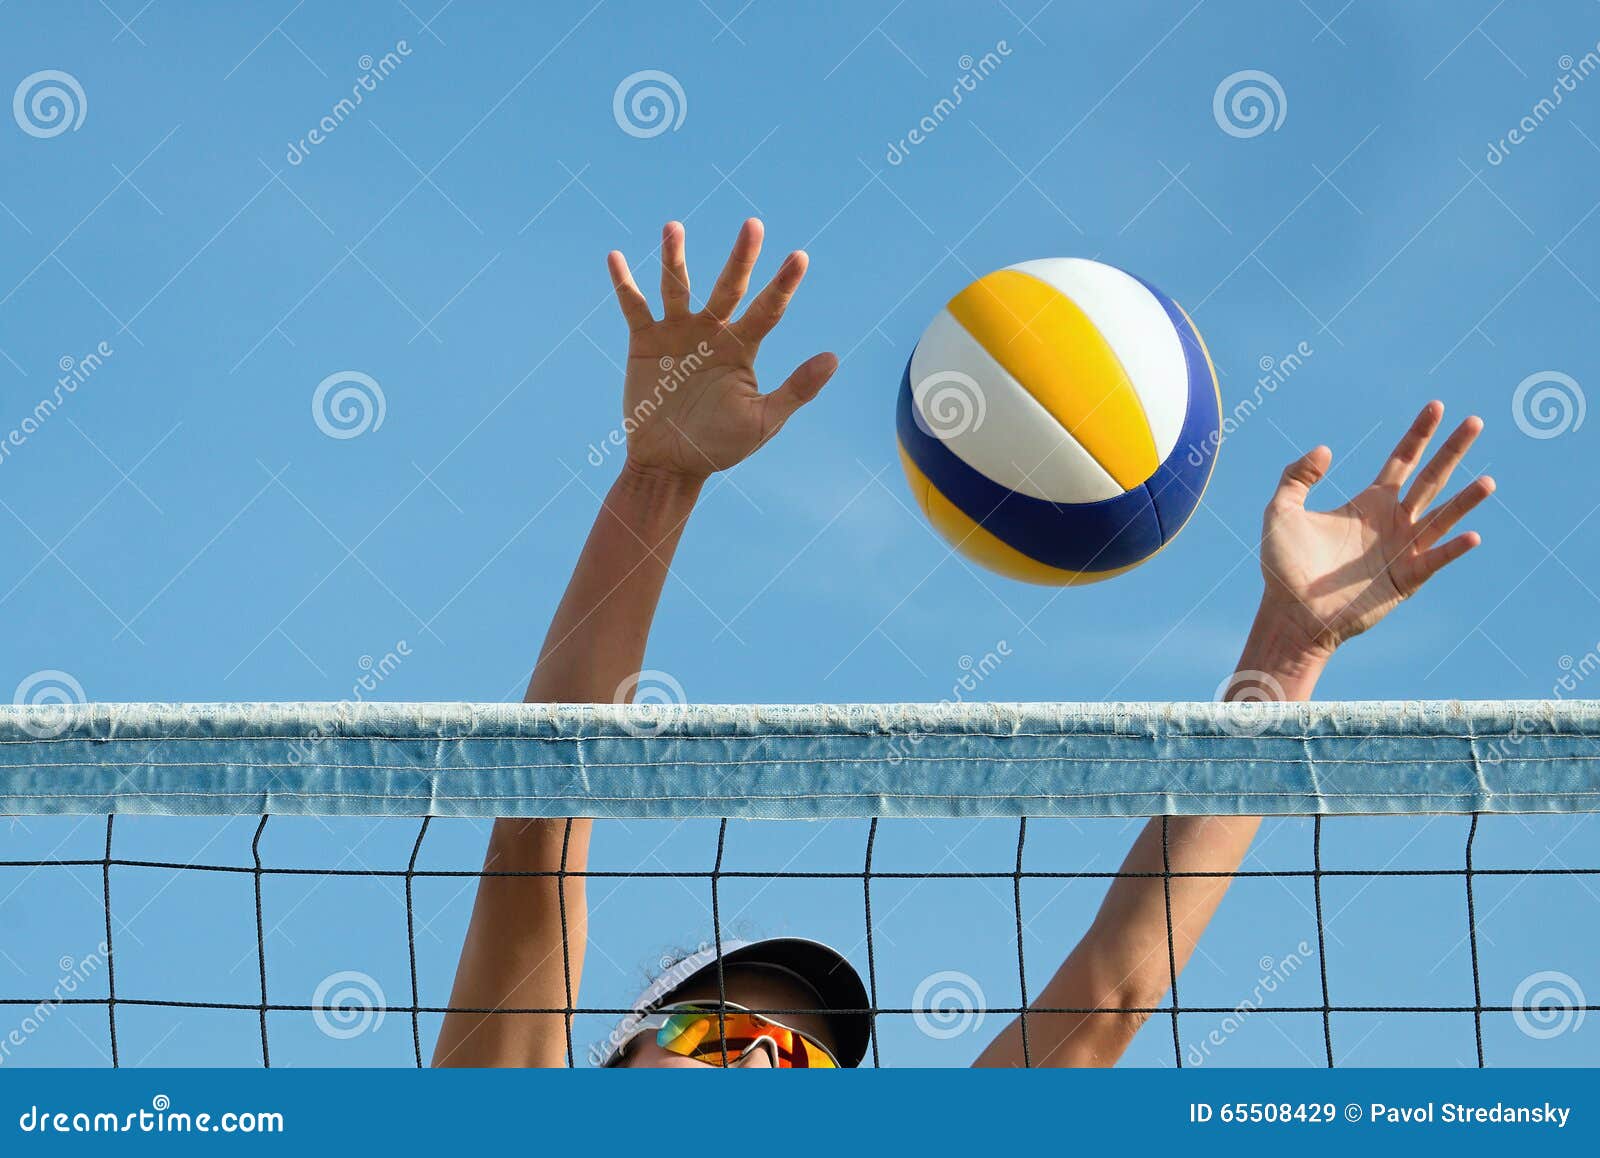 Beach Volleyball Player Jumps Stock Image - Image of activity, beach ...